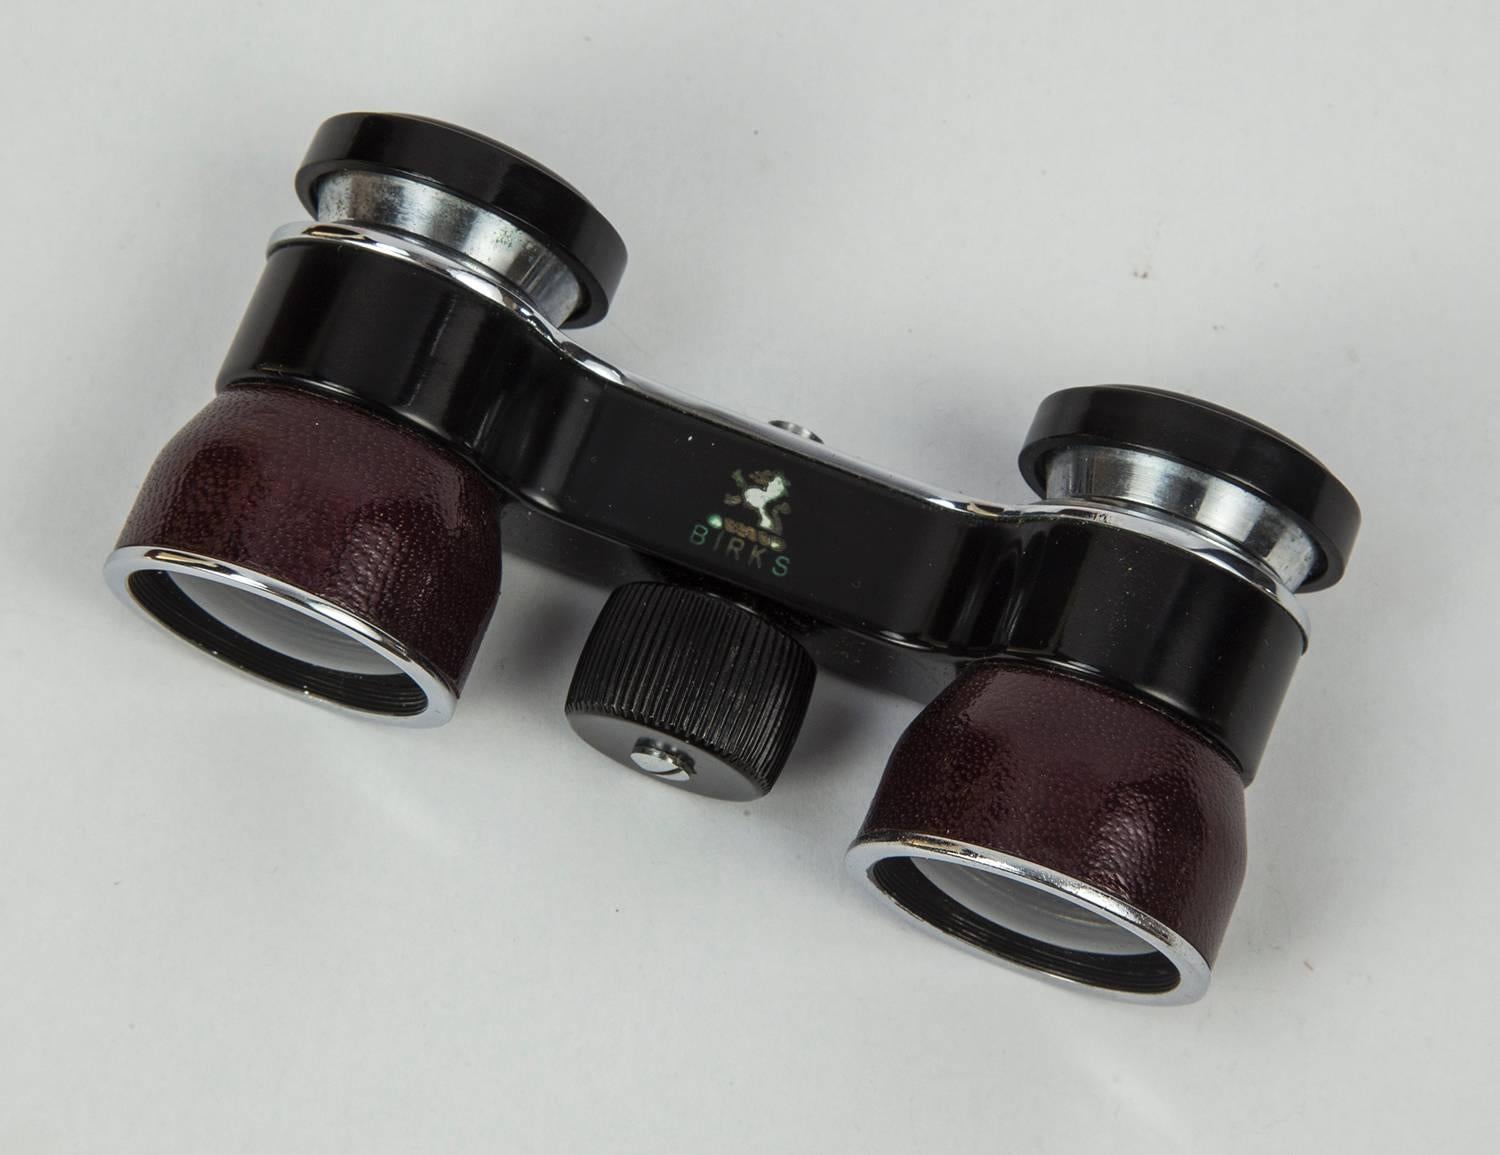 Amazing pair of Art Deco Binoculars Opera Glasses, chrome plated steel barrels with Bakelite and leather; original leather case; Measure approx: 3.5